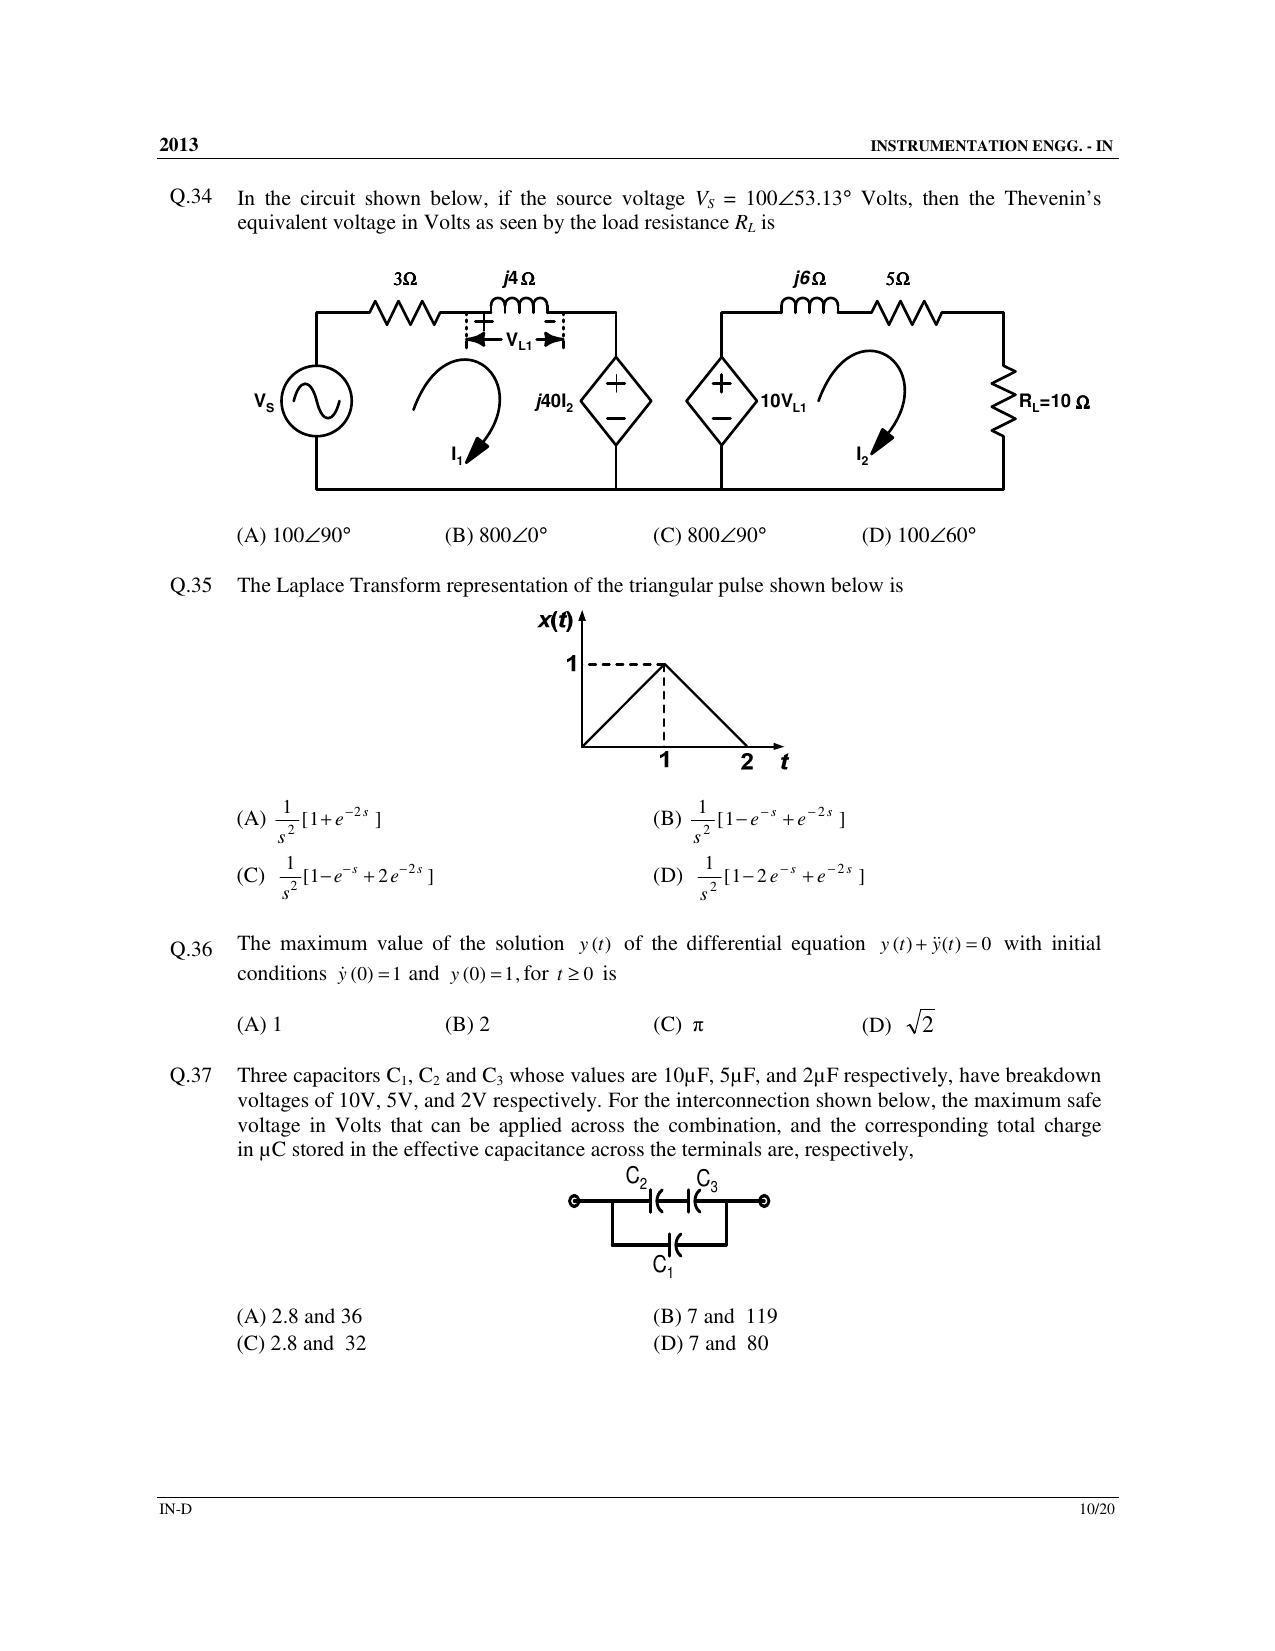 GATE 2013 Instrumentation Engineering (IN) Question Paper with Answer Key - Page 62